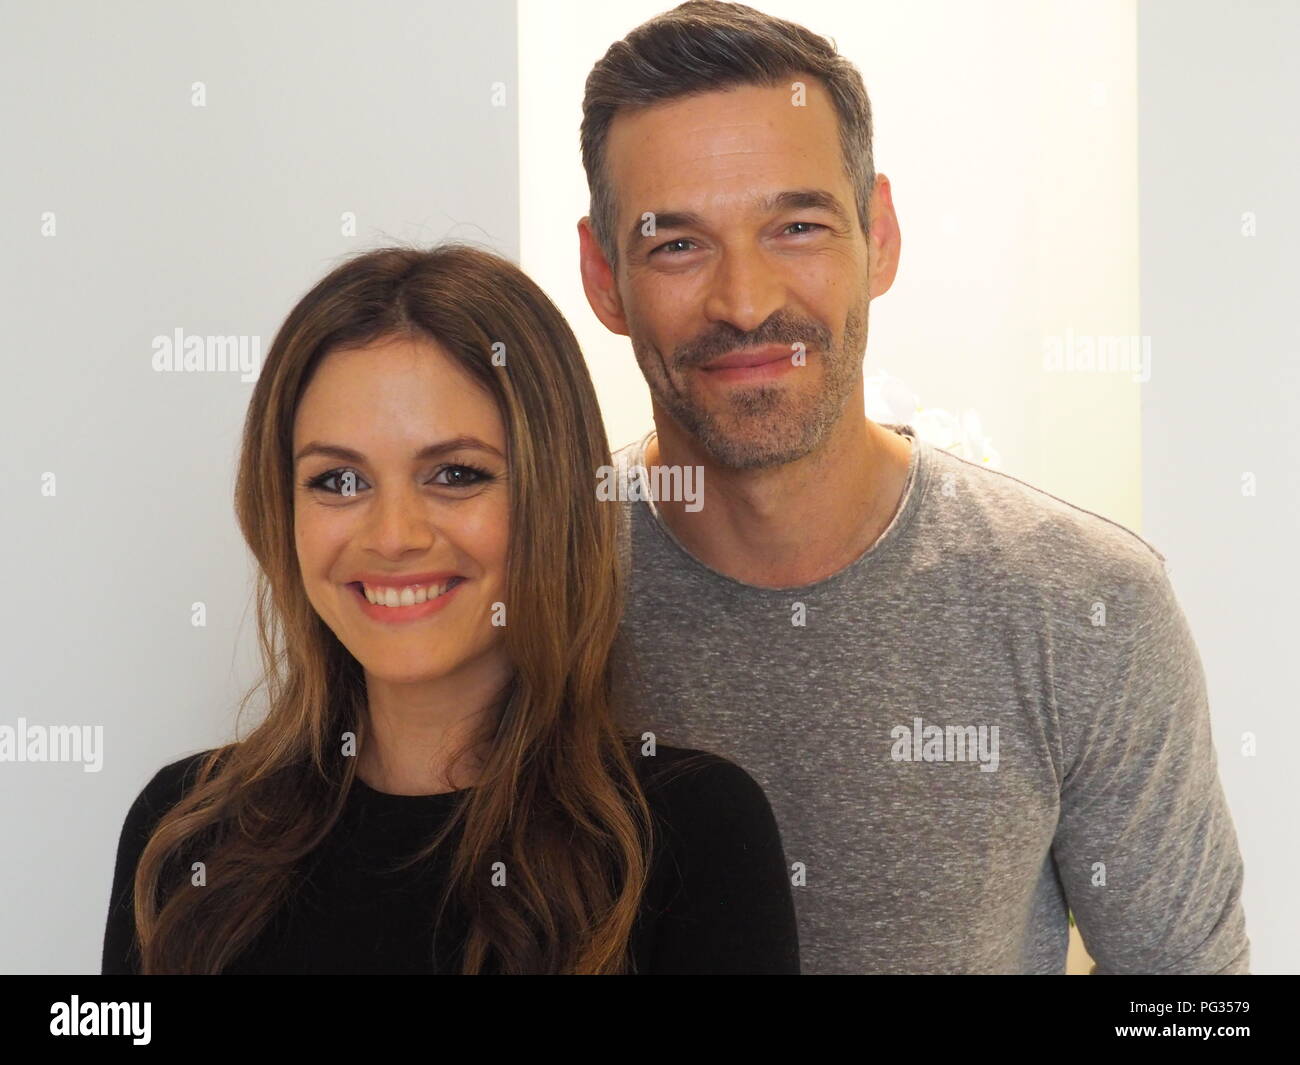 Paris, France. 23rd Aug, 2018. The American actors Rachel Bilson and Eddie Cibrian at a photo shoot for the presentation of the Vox series 'Take Two'. (on dpa 'US actress Rachel Bilson would like to come to Germany' from 23.08.2018) Credit: Christian Böhmer/dpa/Alamy Live News Stock Photo